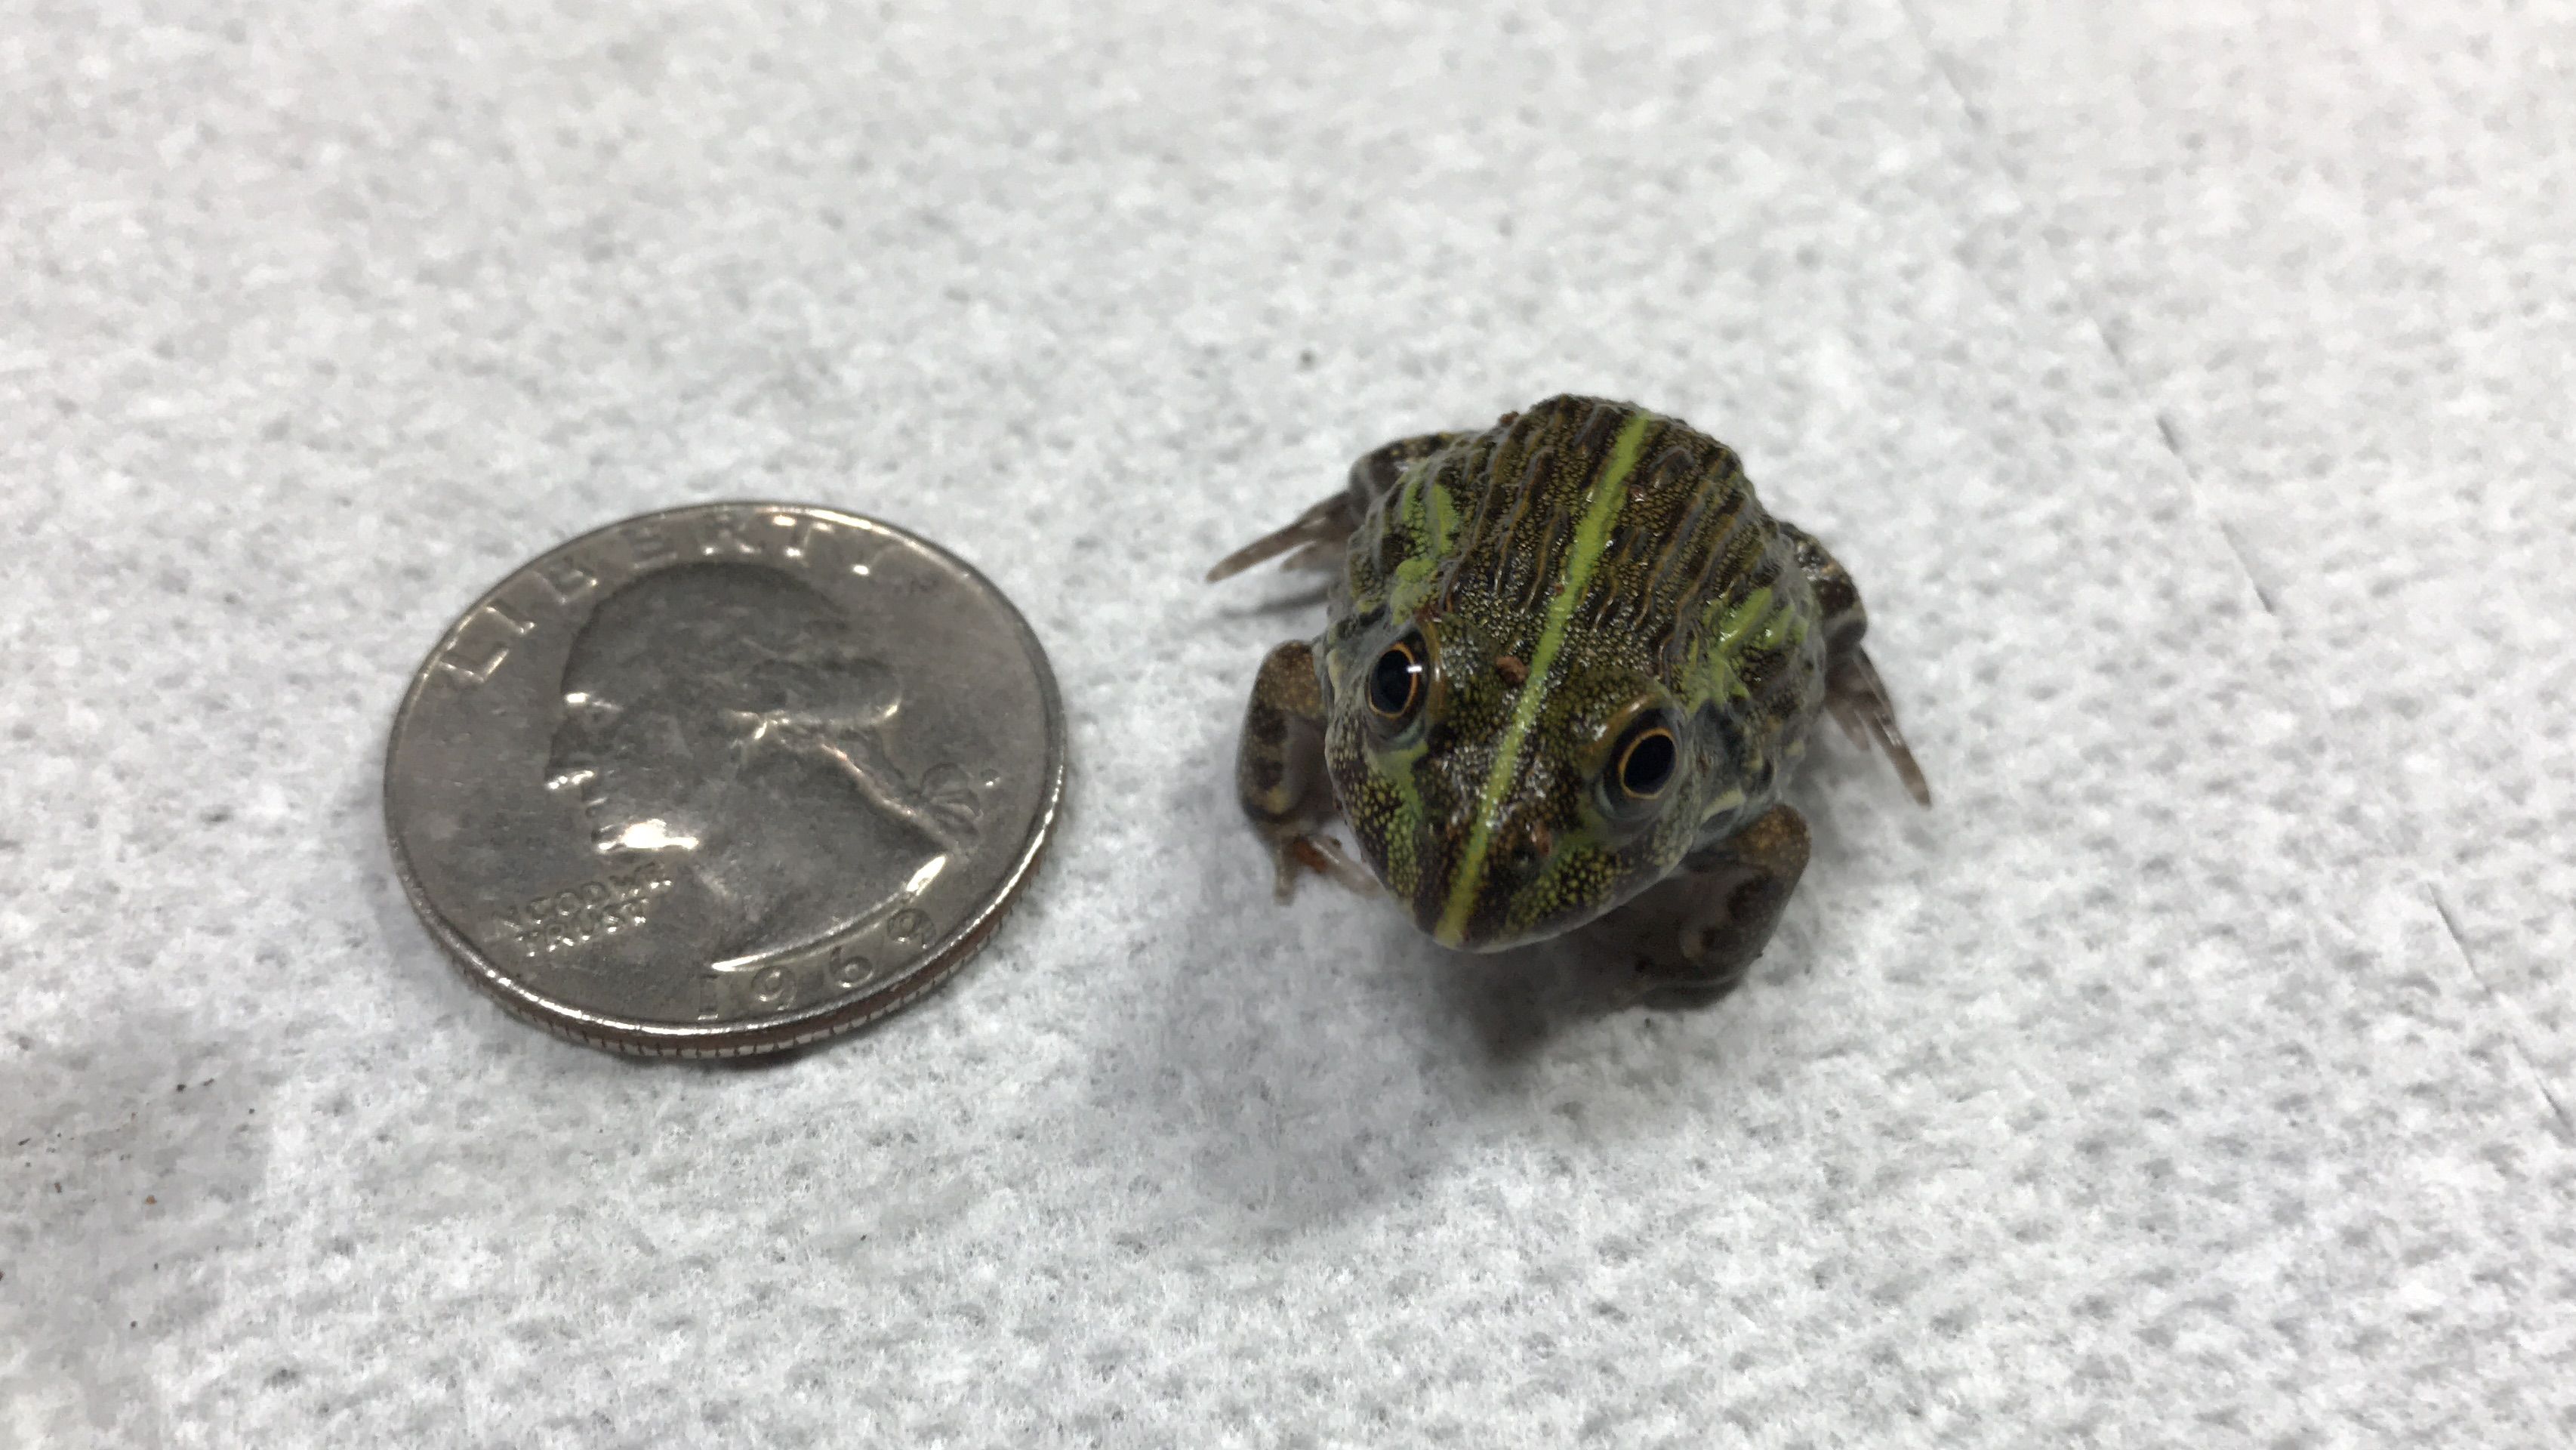 Peter the Baby Pixie Frog — Steemit